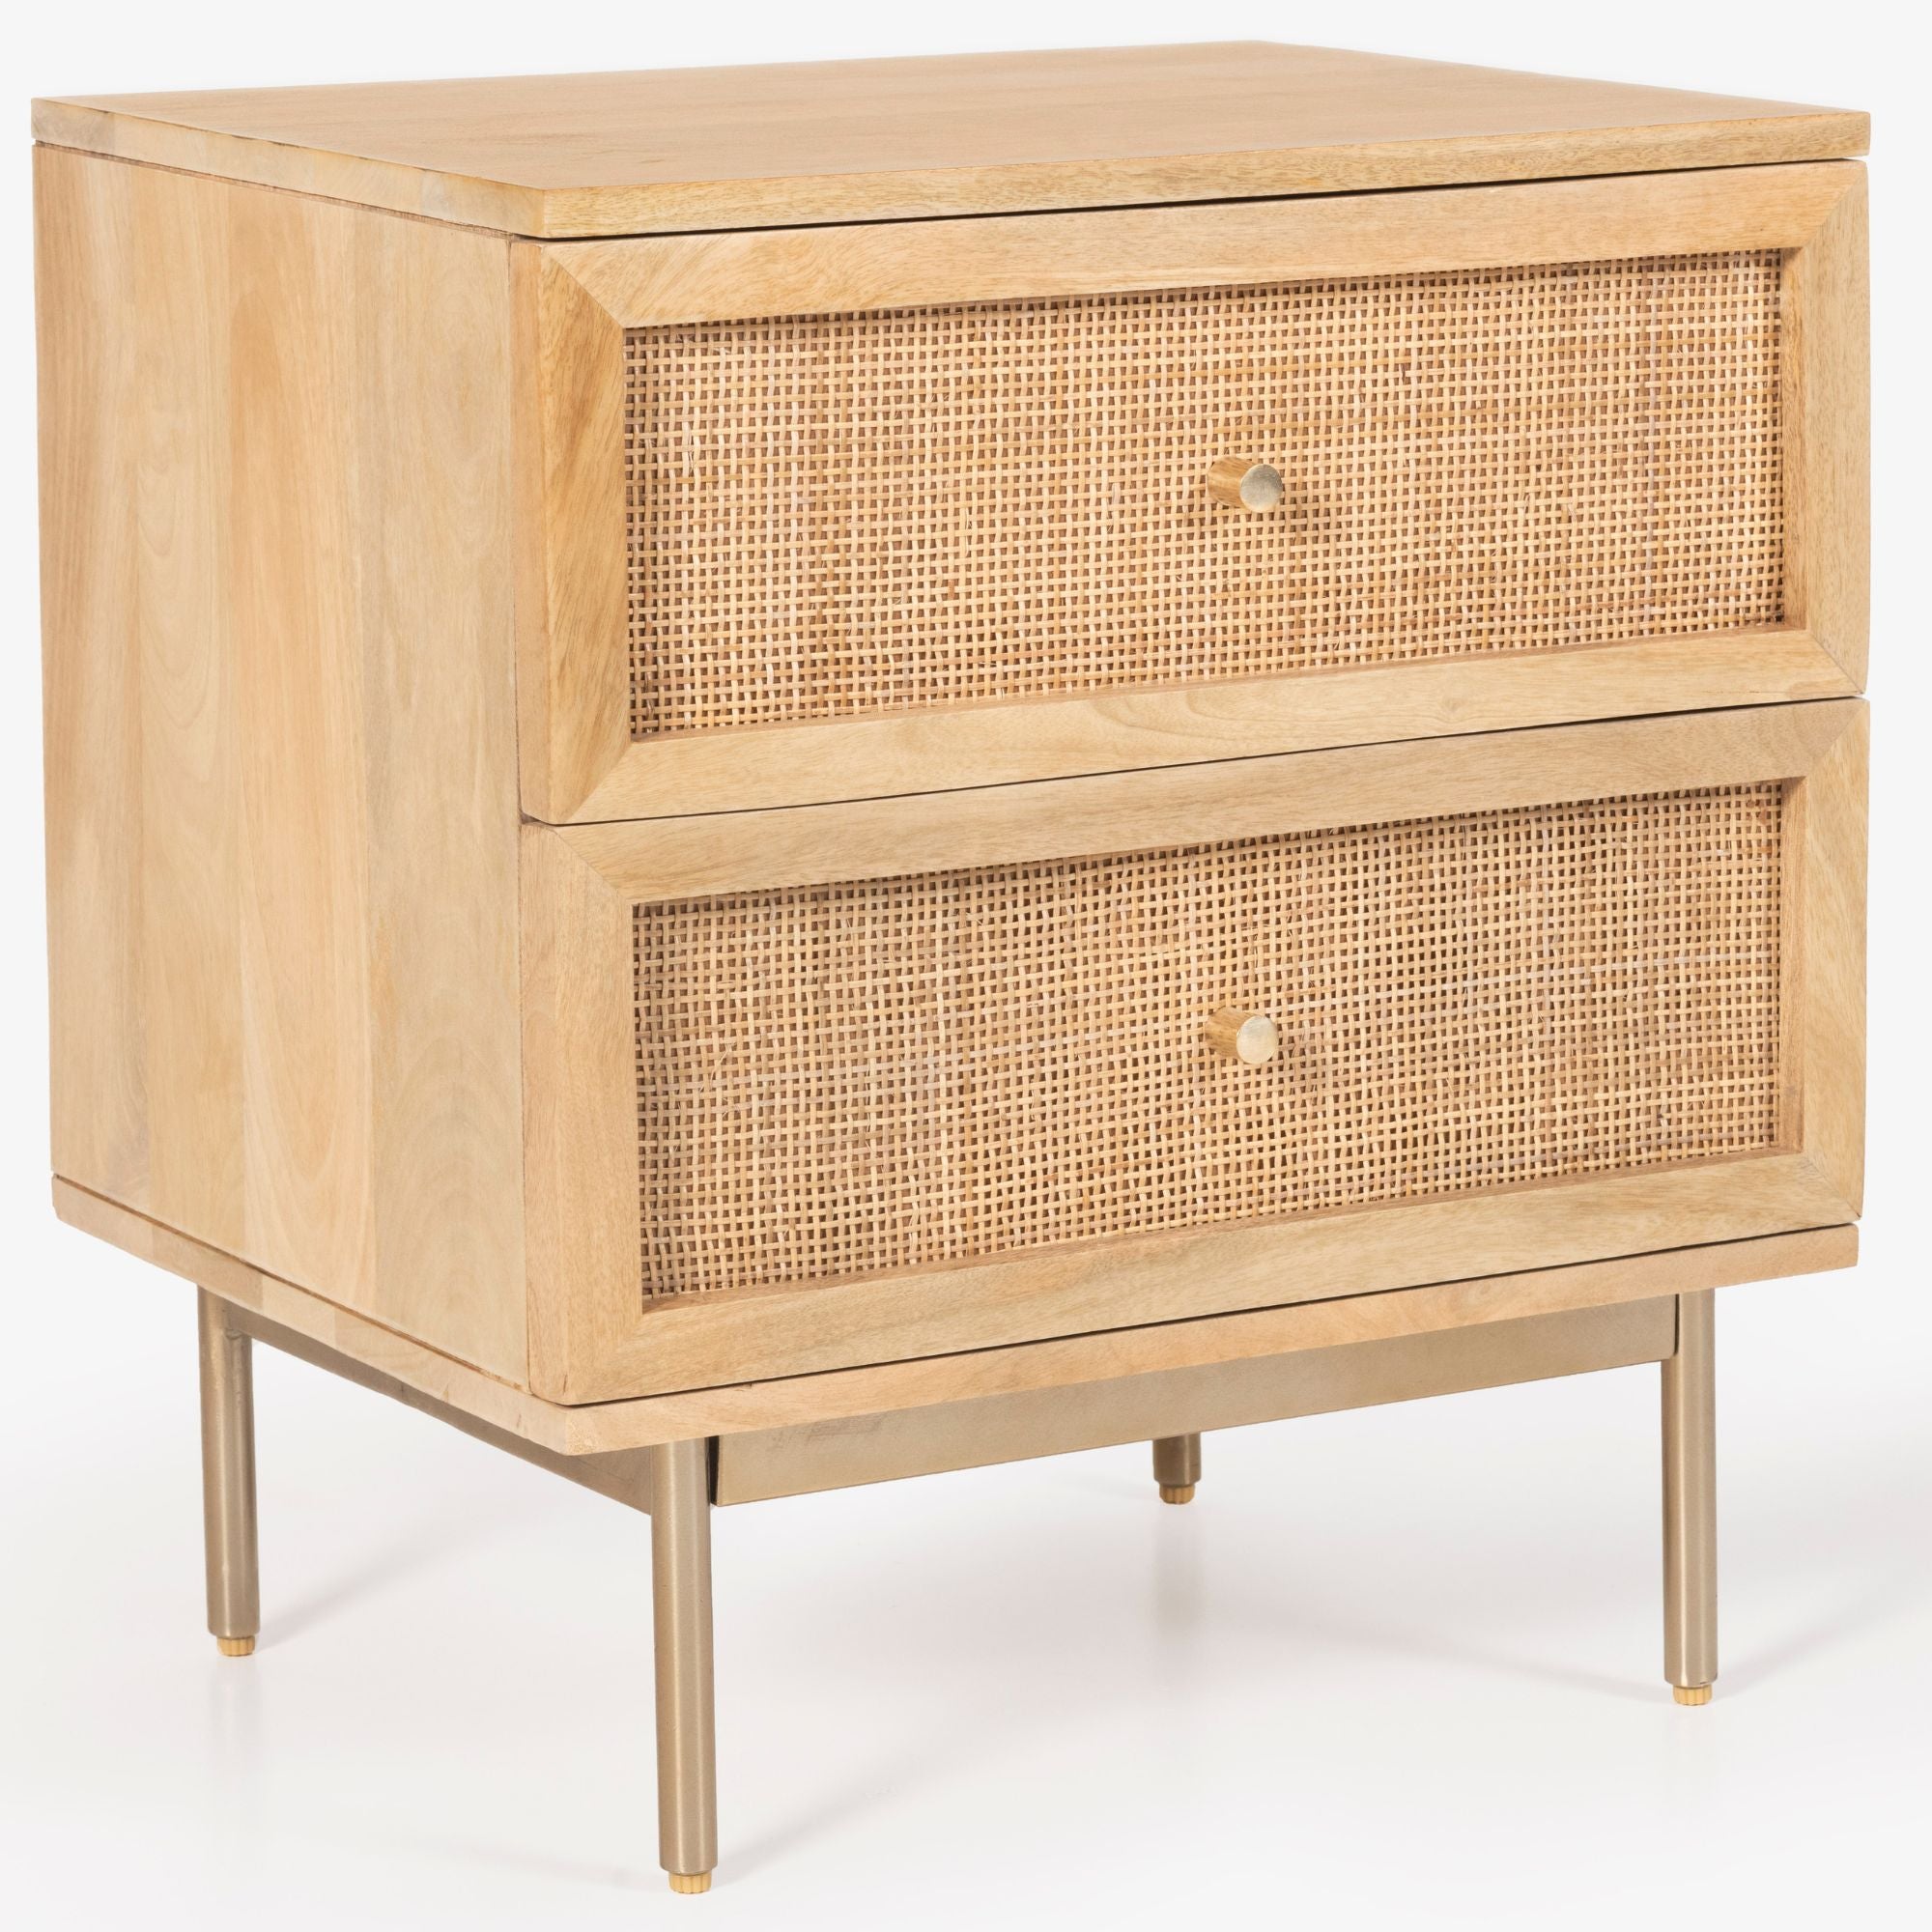 Martina Bedside Table 2 Drawer Storage Cabinet Solid Mango Wood Rattan - SILBERSHELL